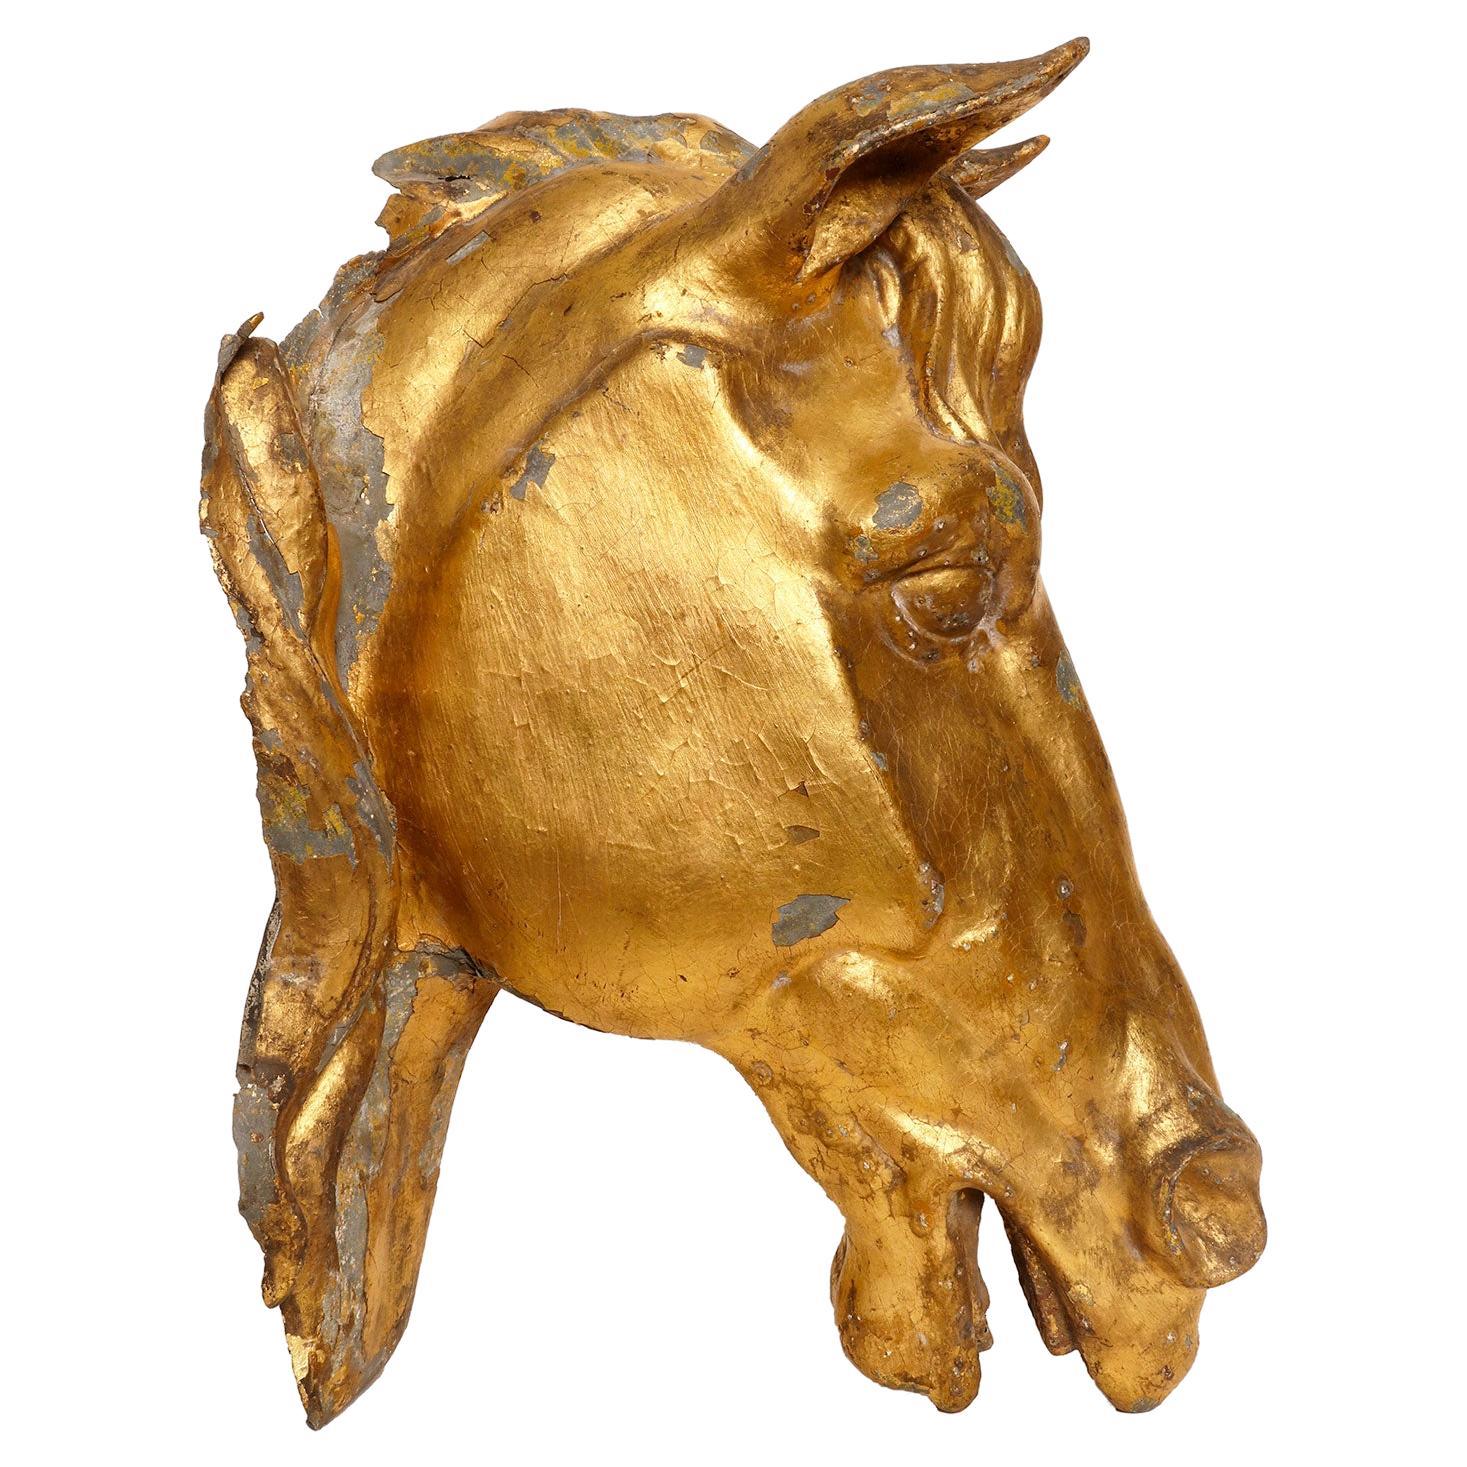 Horse’s Head Sculpture, Decorative Part of an English Country House England 1870